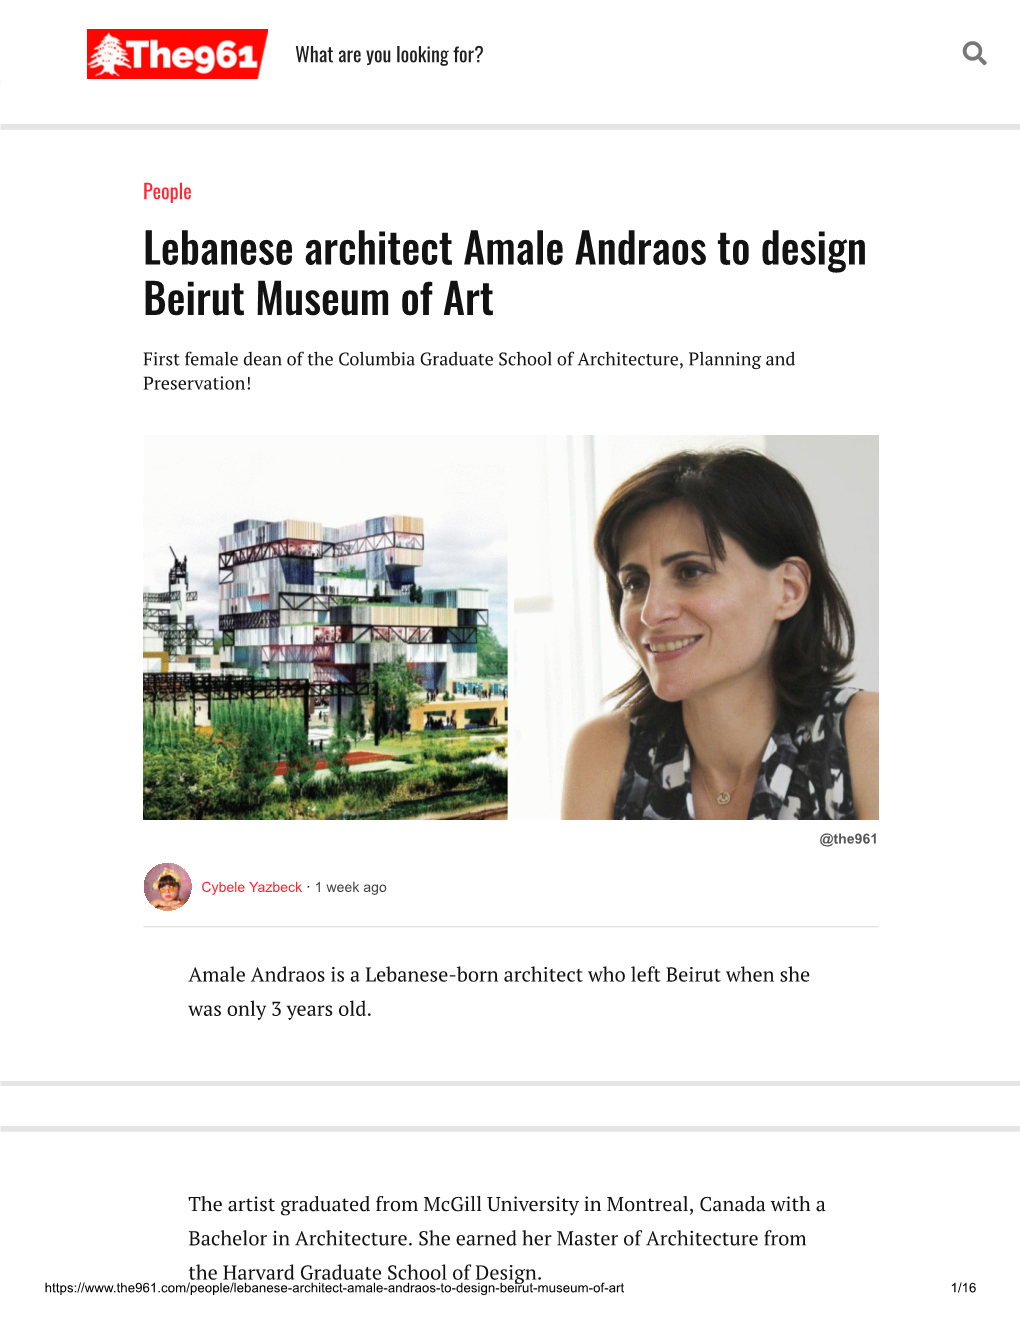 Lebanese Architect Amale Andraos to Design Beirut Museum of Art What Are You Looking For? 